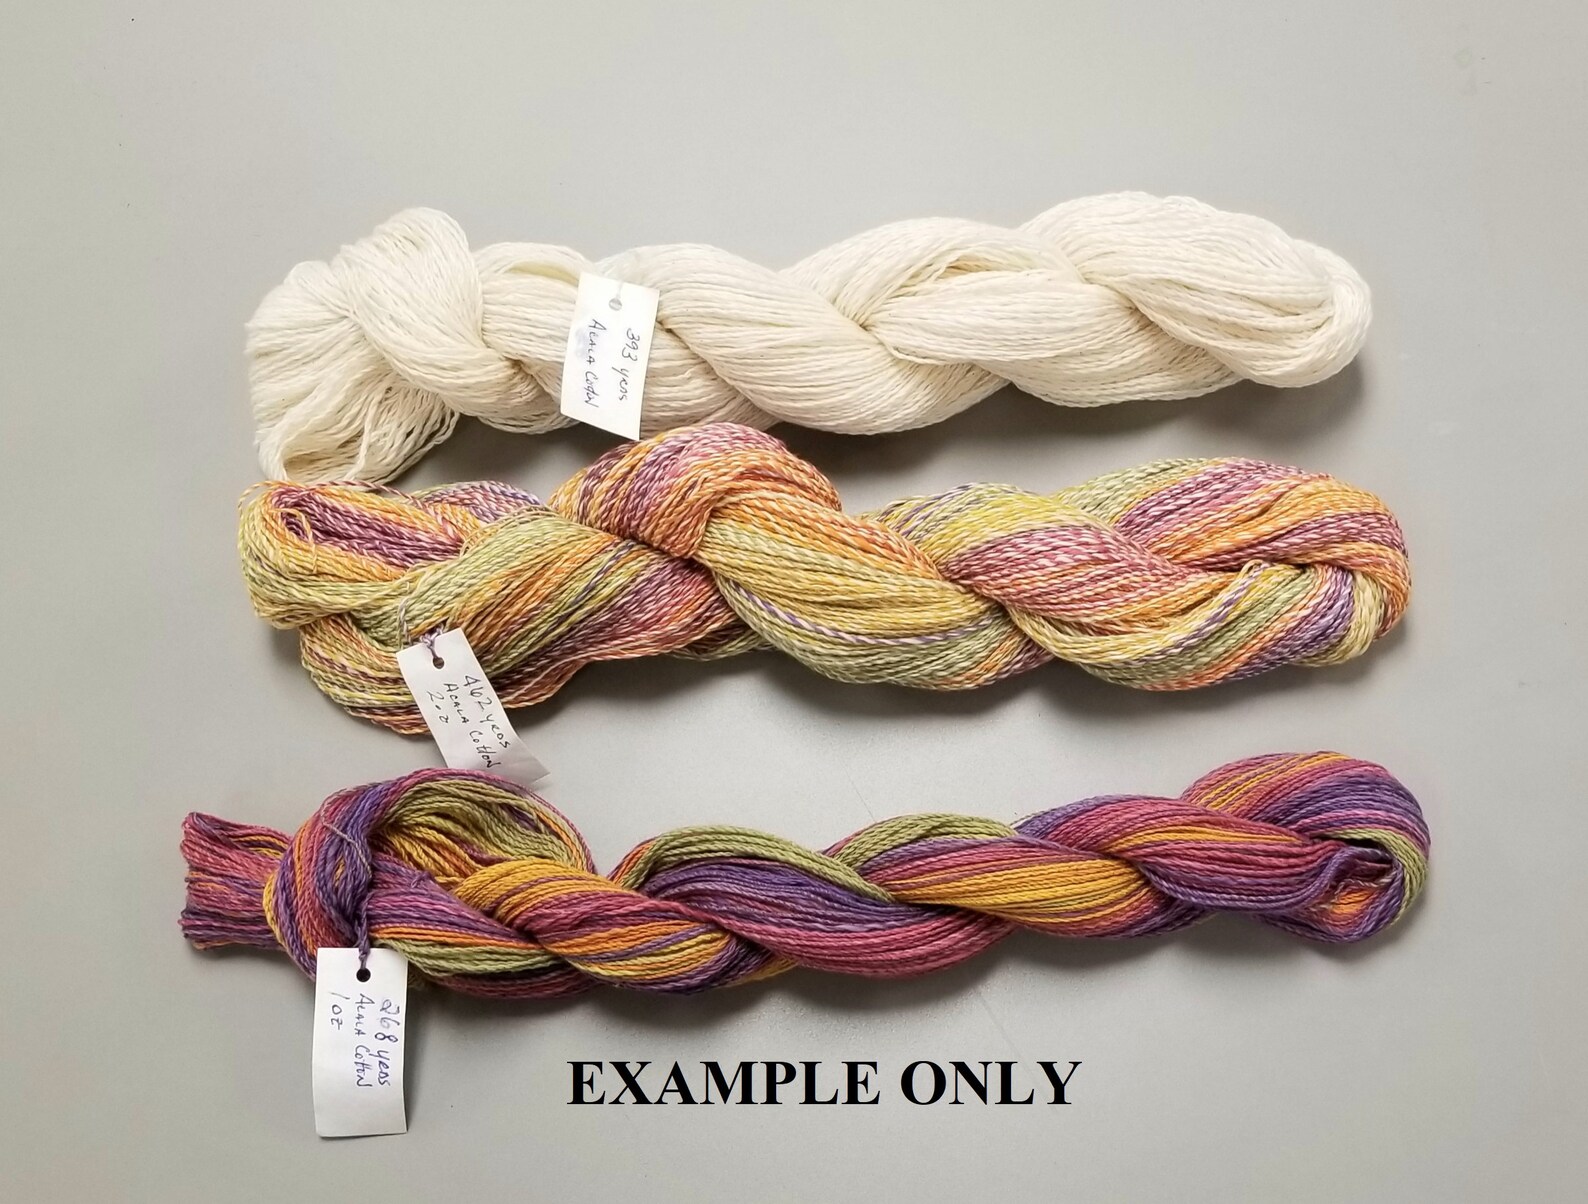 Easy-to-SPIN Natural Acala Cotton Sliver. Great for ...